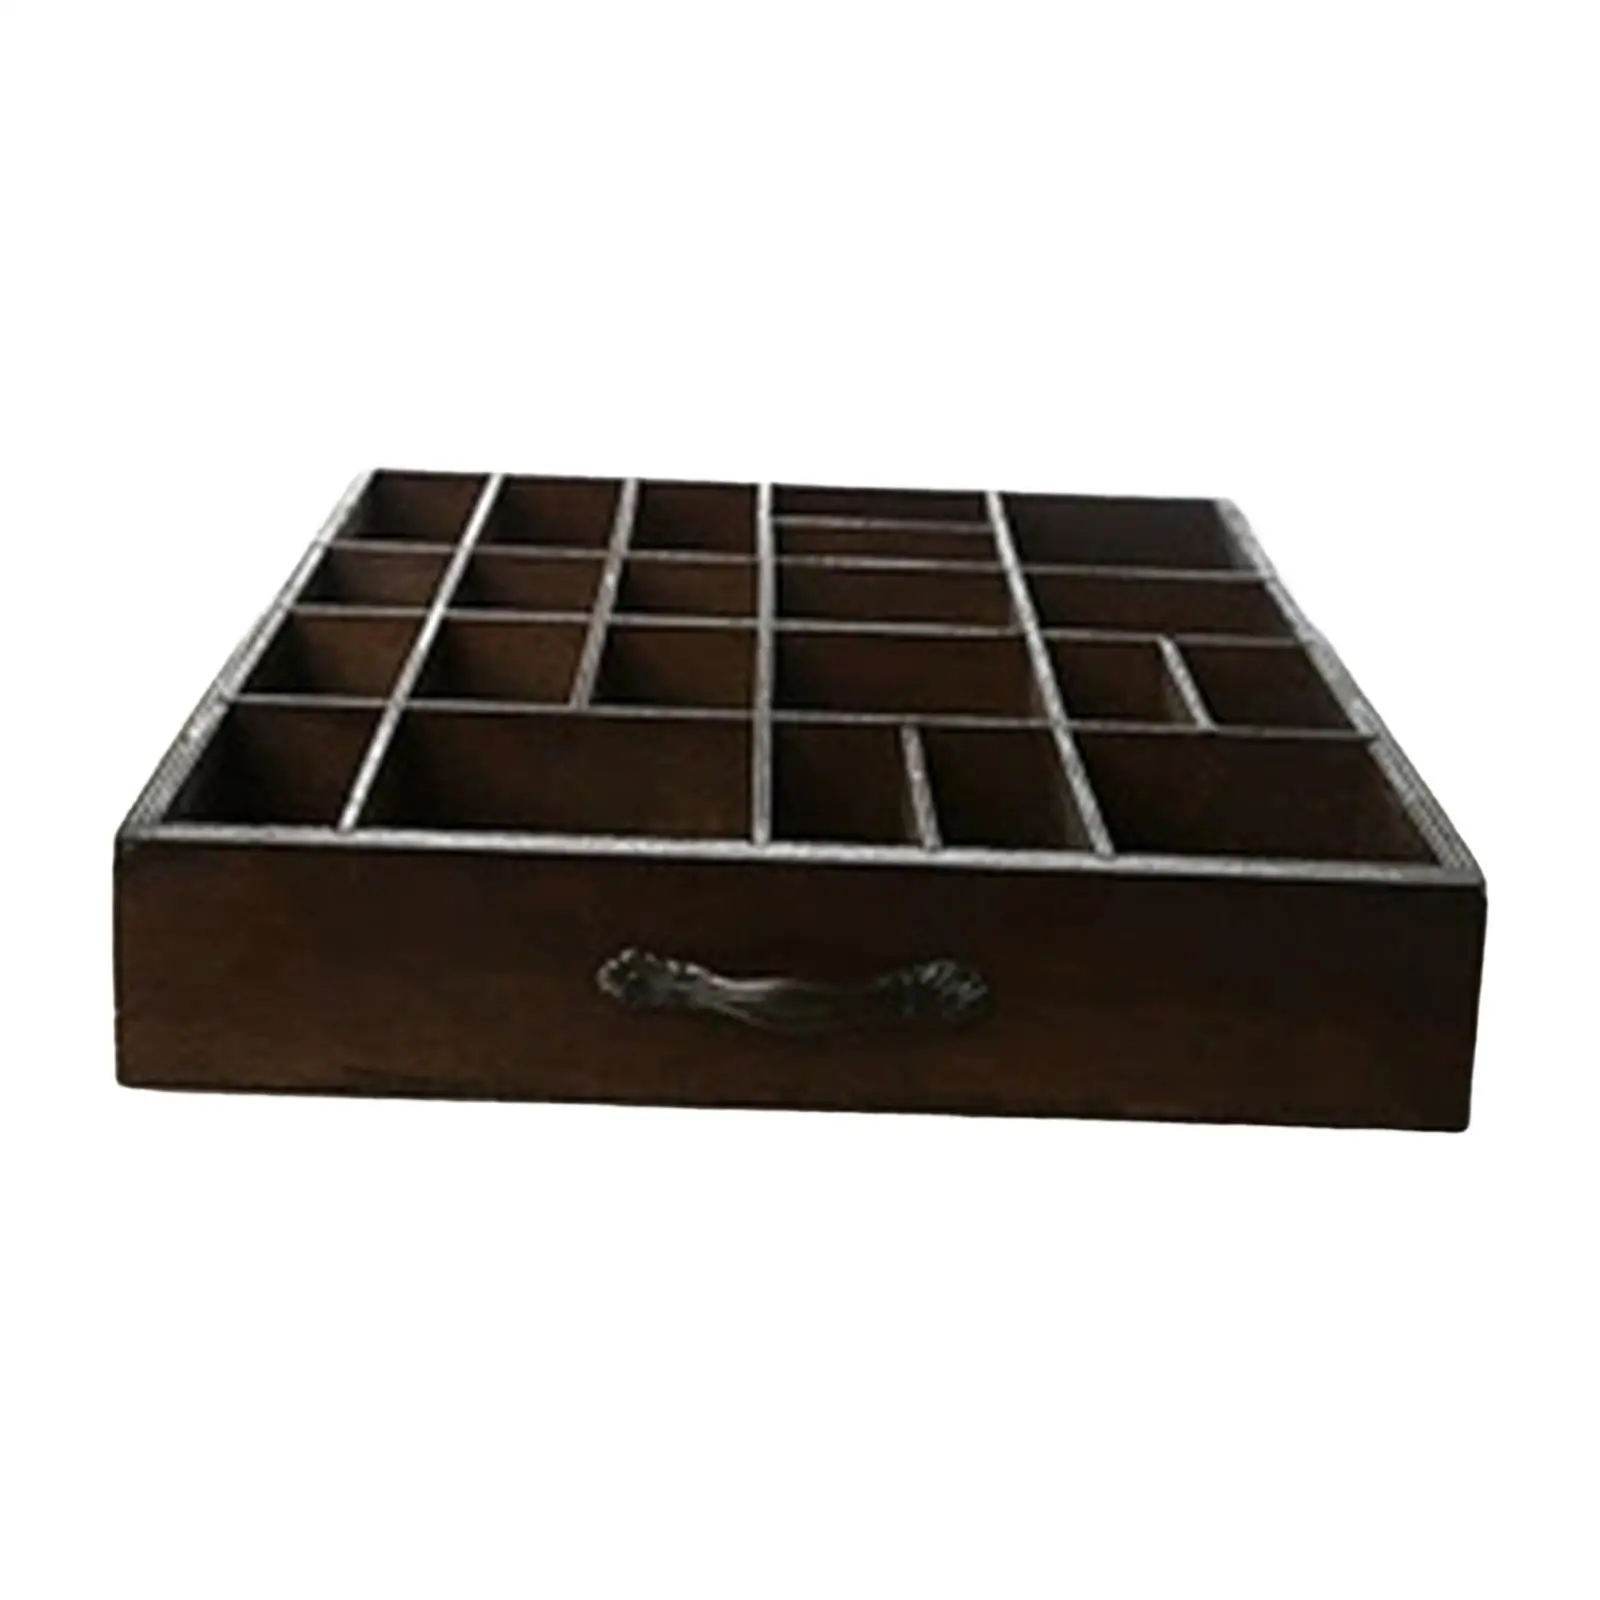 Divided Tray Organizer Table Storage Box Desk Organizer with Dividers for Drawer Sundry Kitchen Countertop Office Dresser